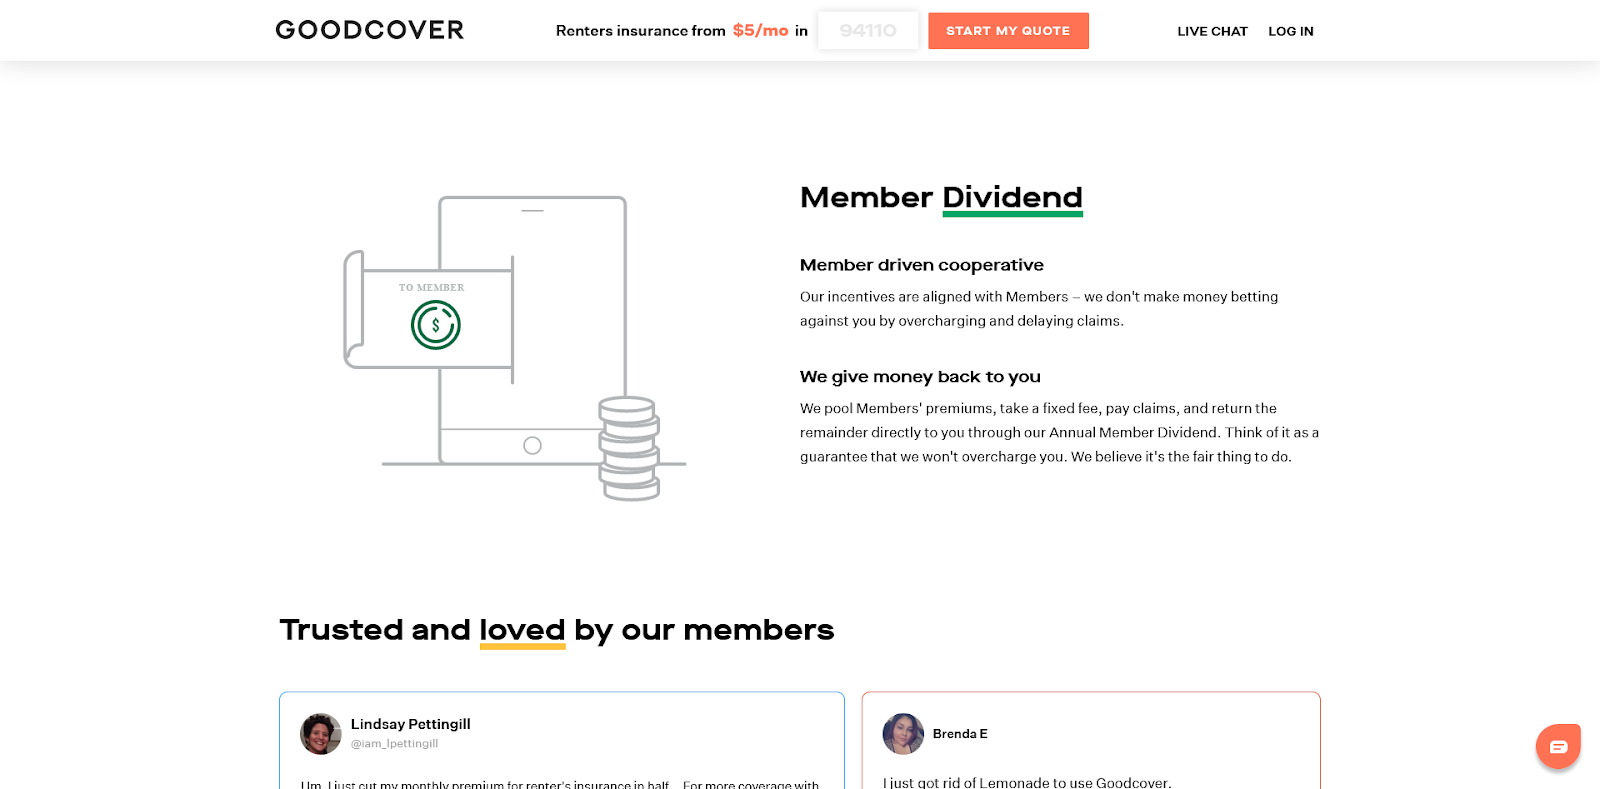 Goodcover Annual Member Dividend